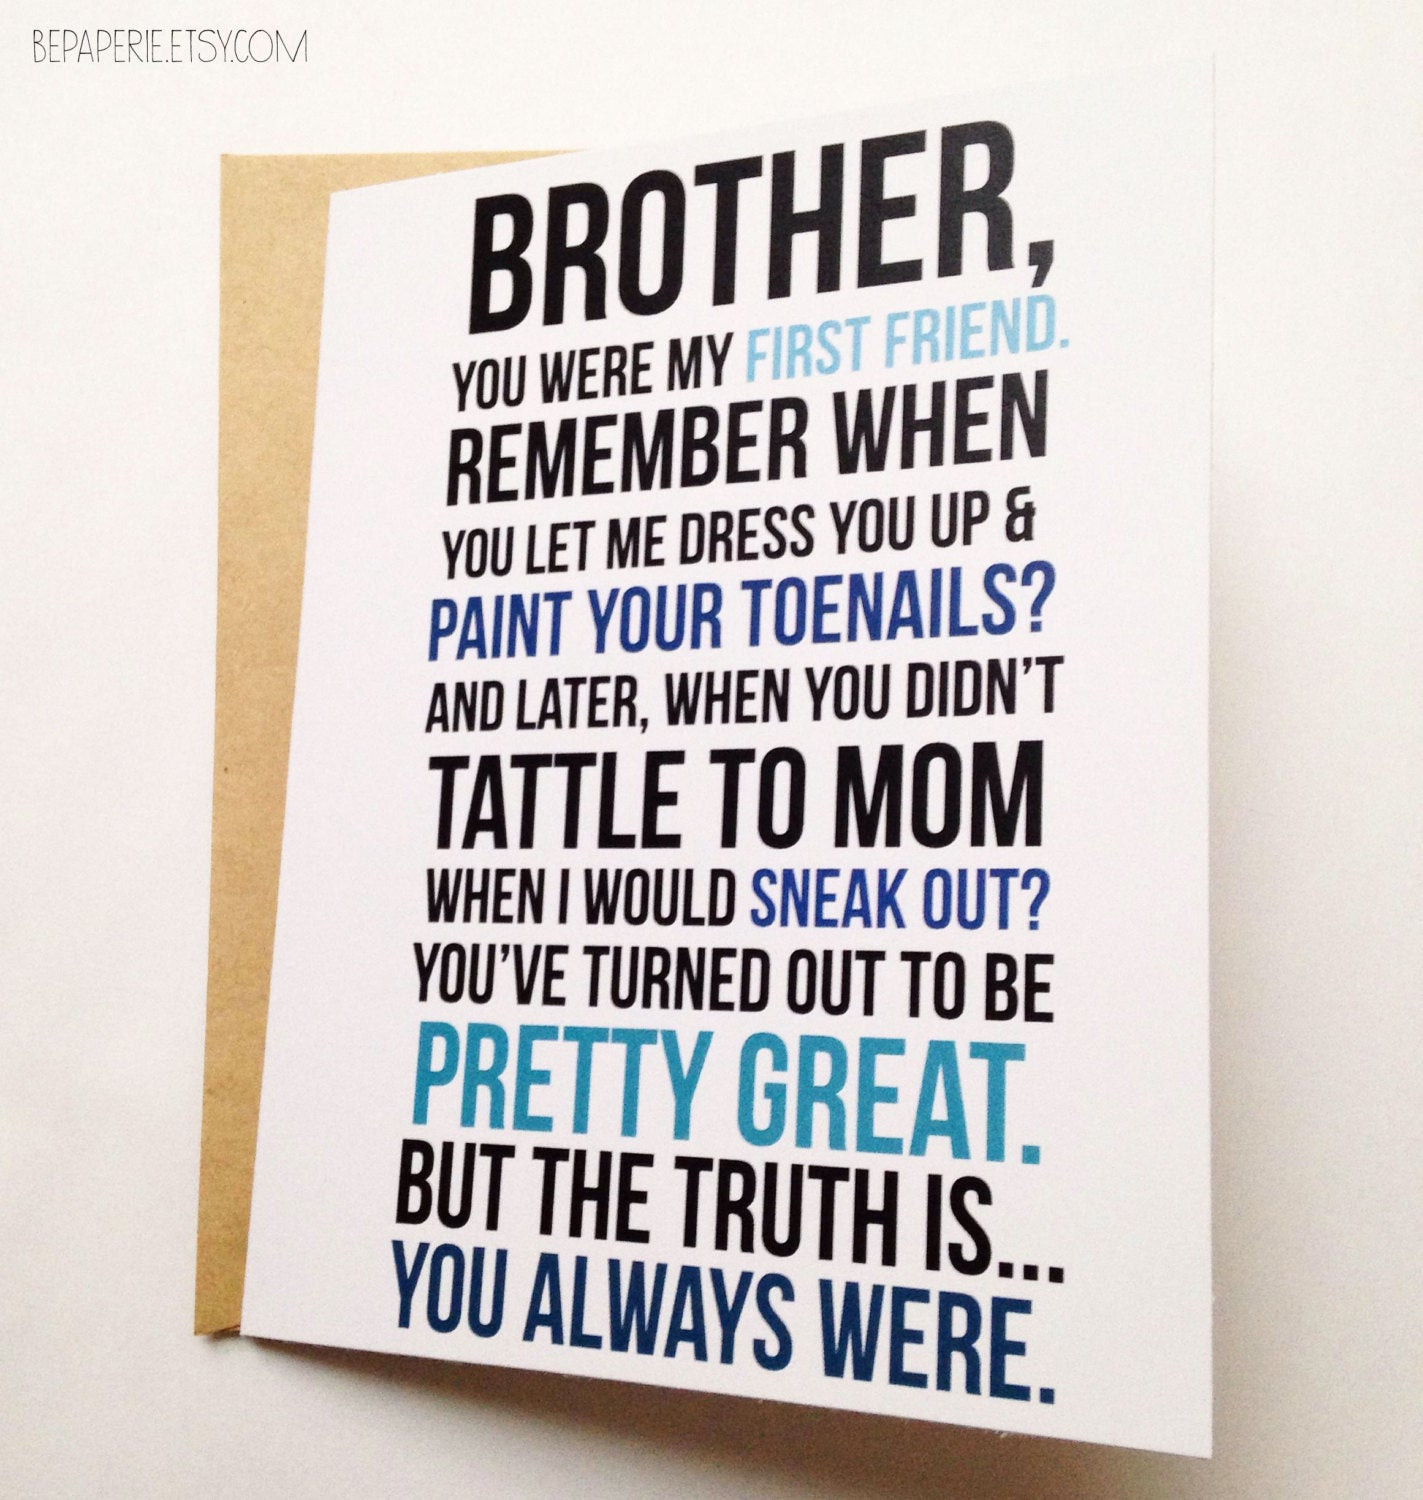 Funny Birthday Cards Brother
 Brother Card Brother Birthday Card Funny Card Card for